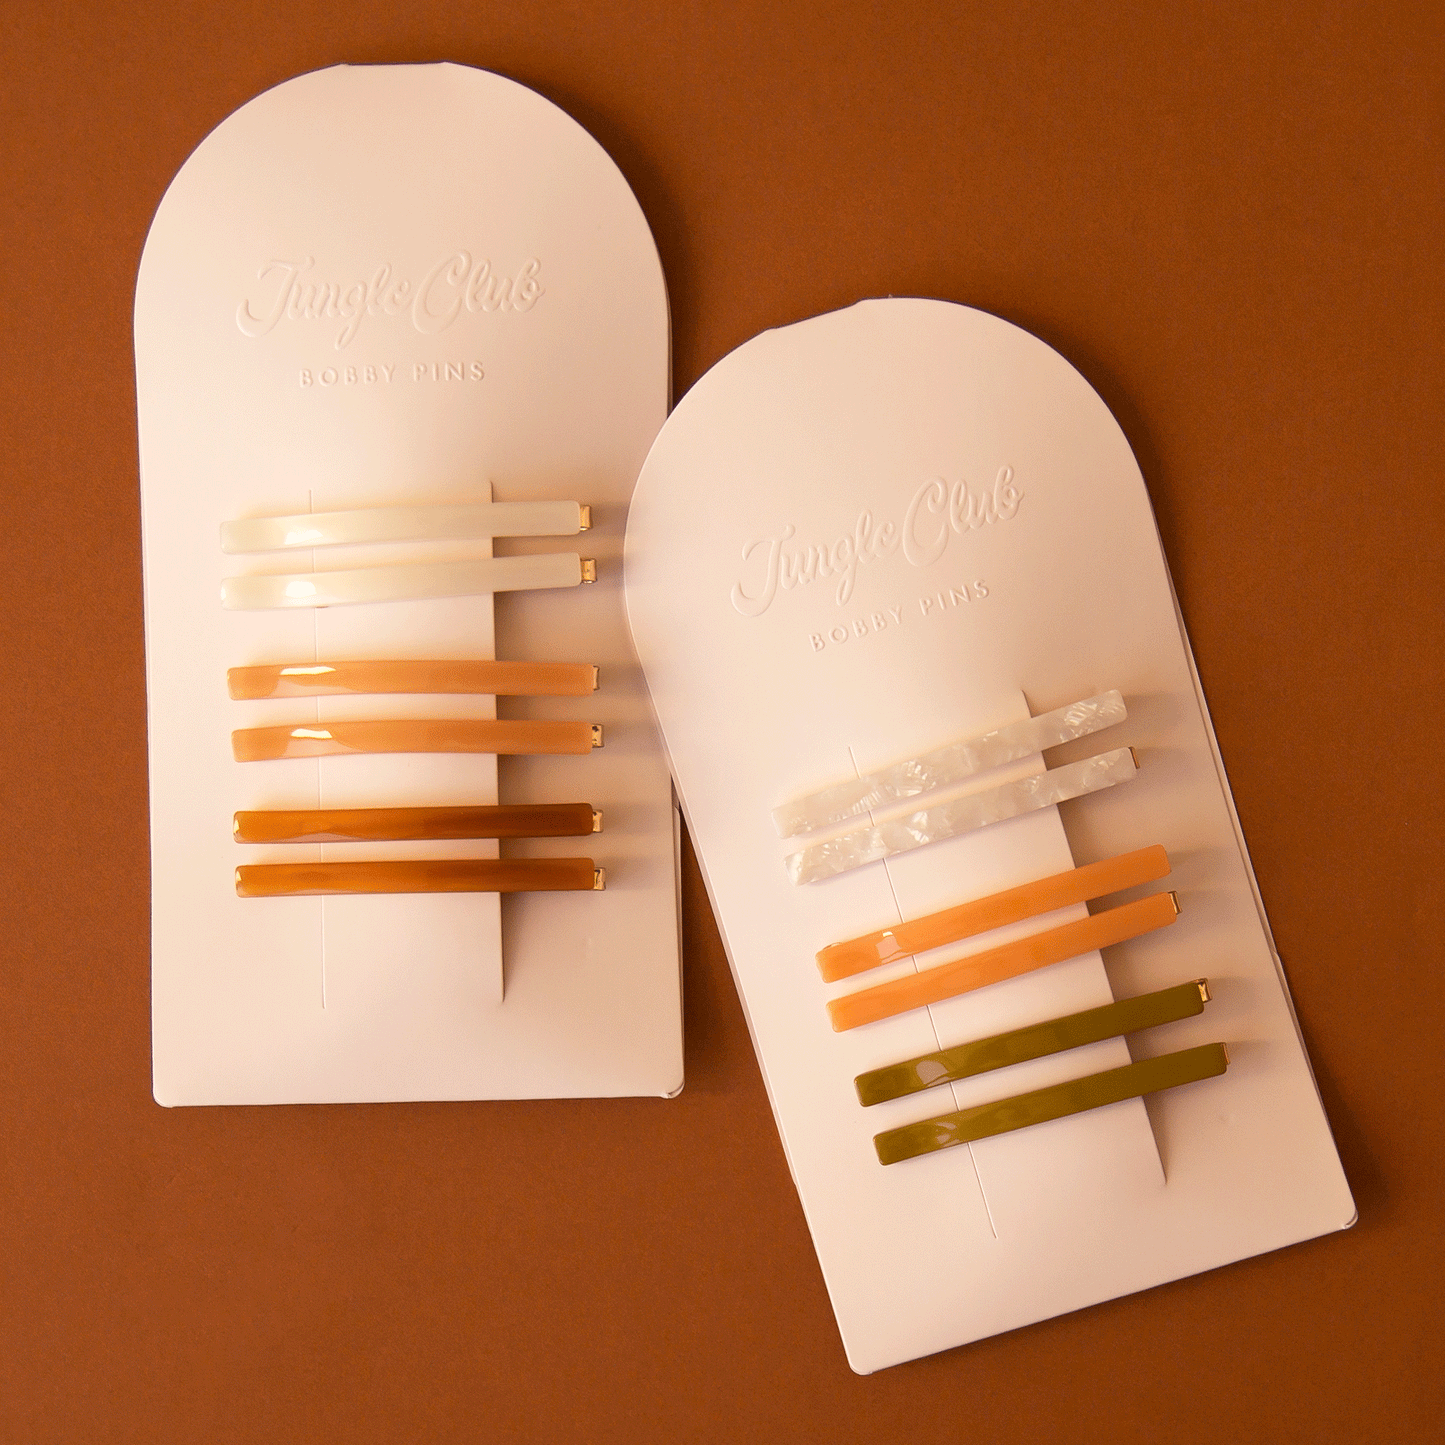 On a burnt orange background is both of the available color ways of the acetate bobby pin sets on arched packaging.